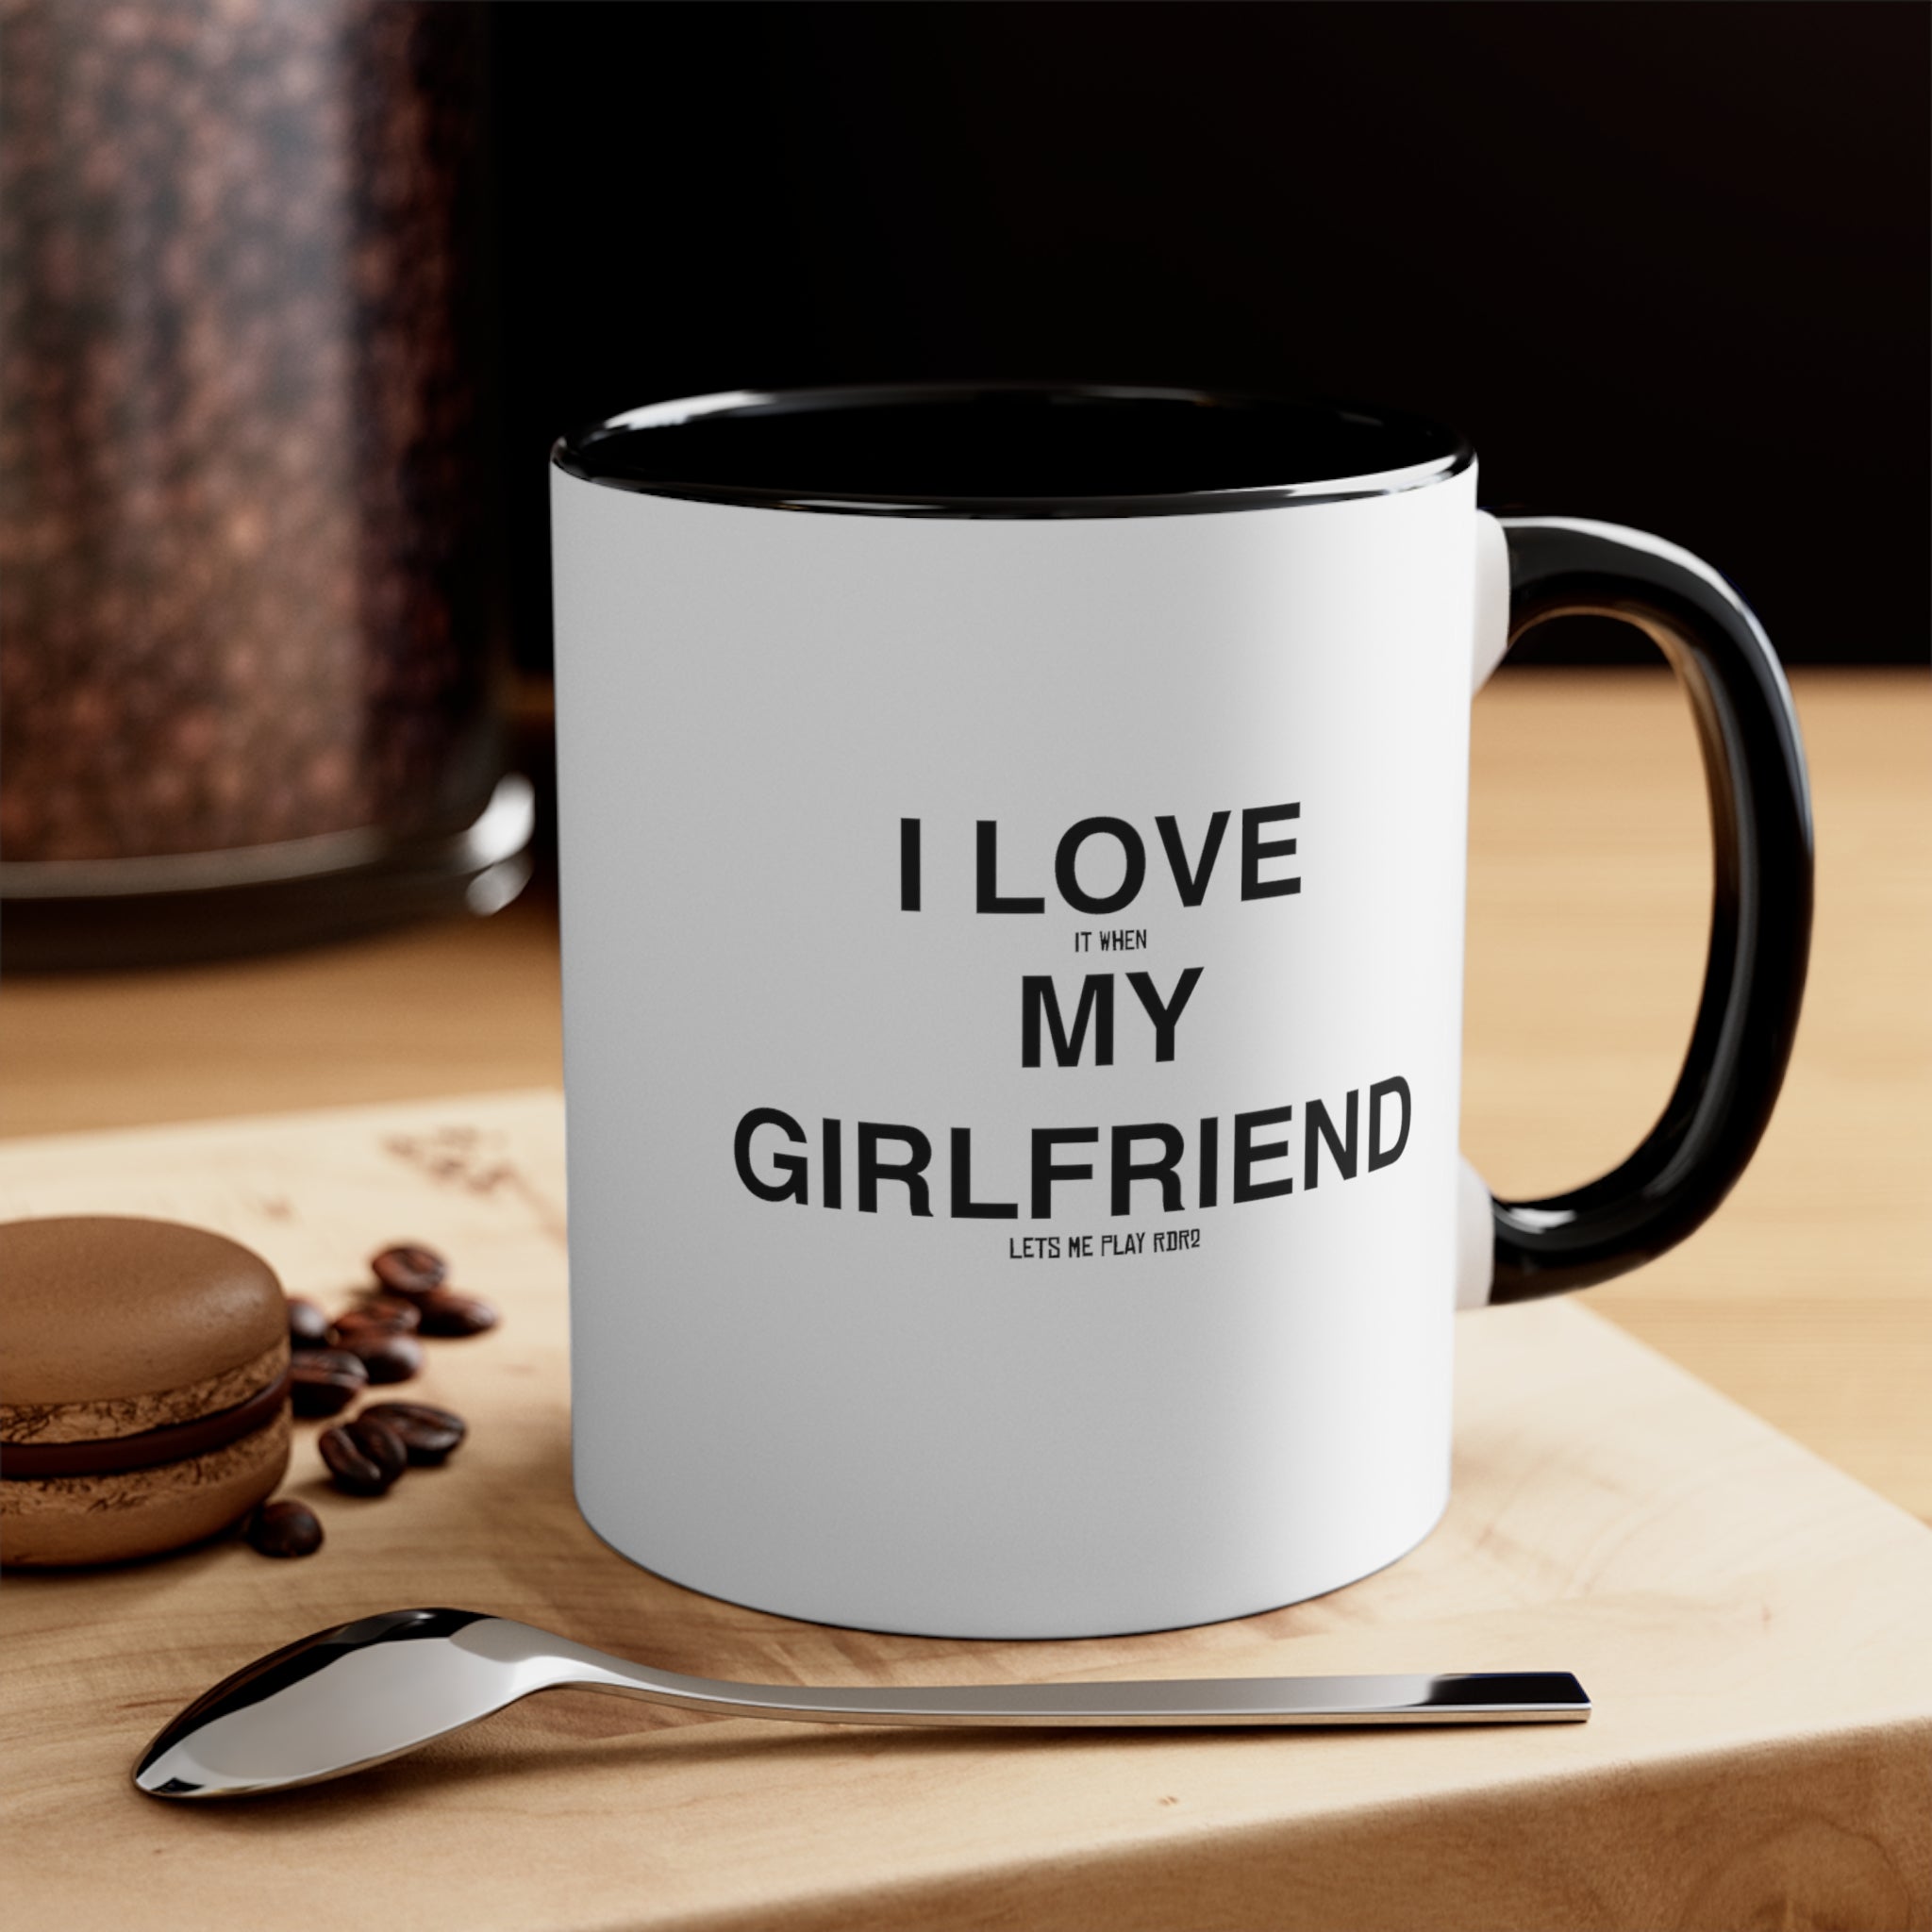 RDR2 Red Dead Redemption 2 Funny Coffee Mug, 11oz I Love My Girlfriend Valentine's Birthday Christmas Gift For Her Gift For Him